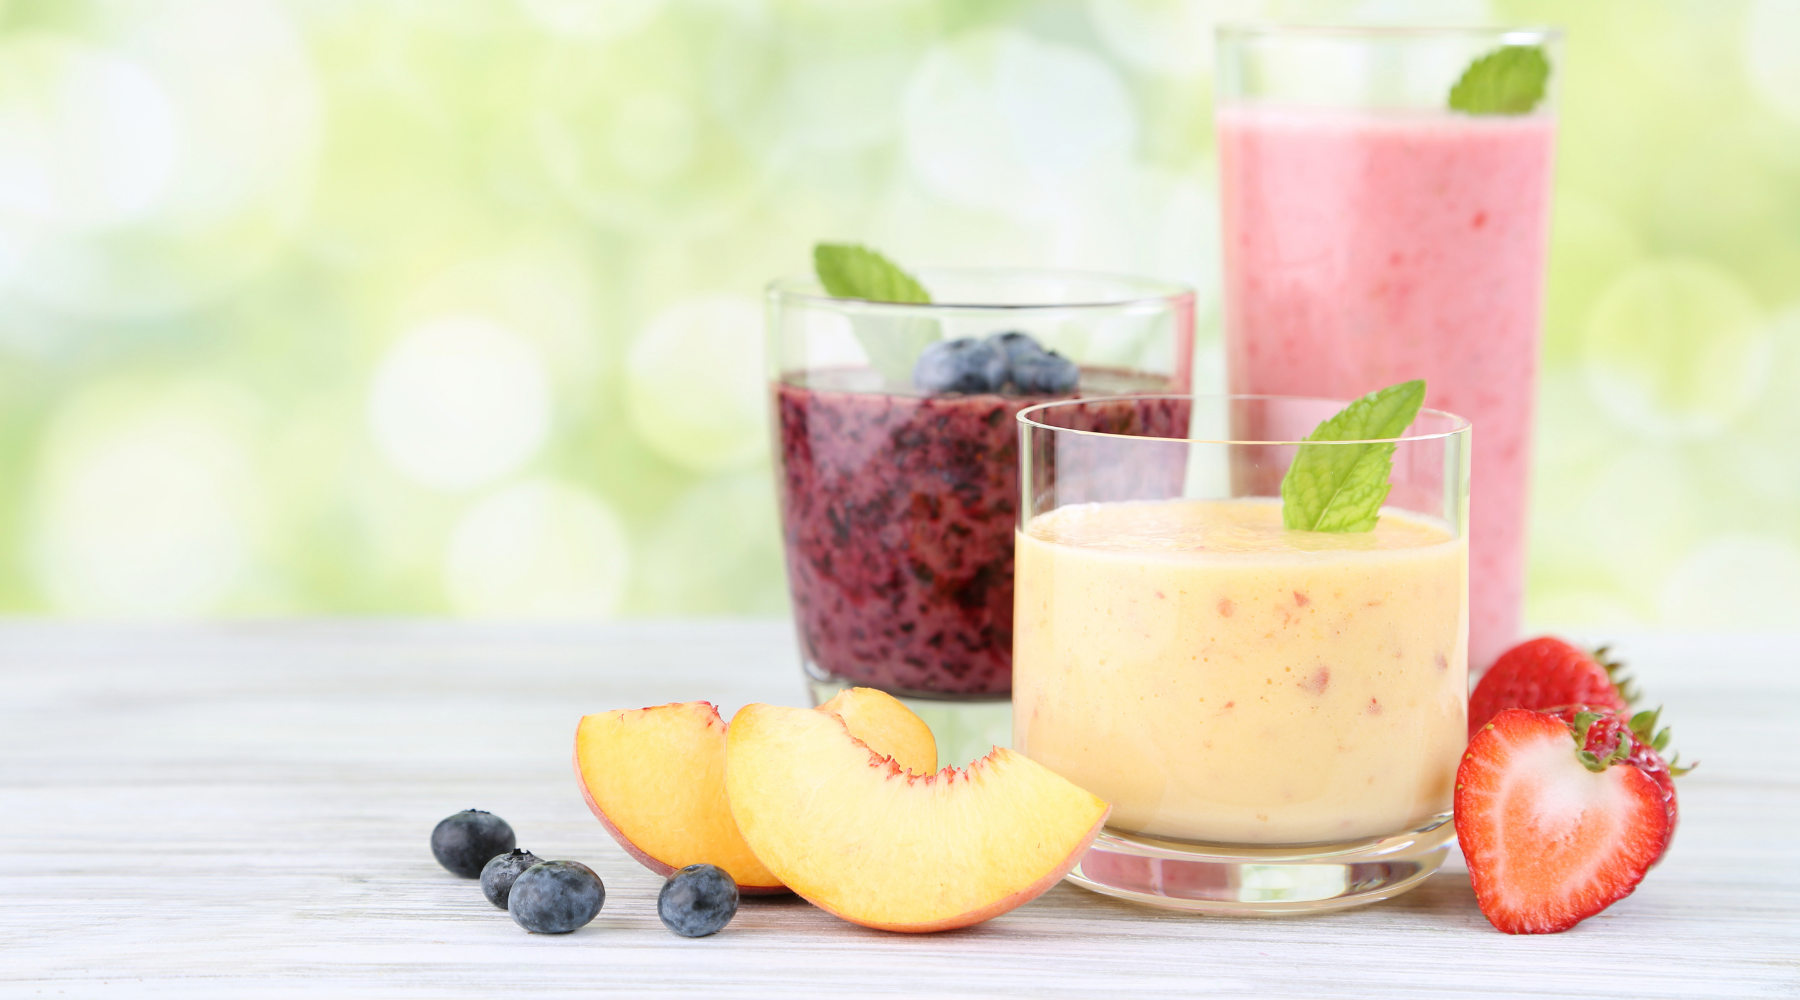 6 MOUTHWATERING, HEALTH SMOOTHIES